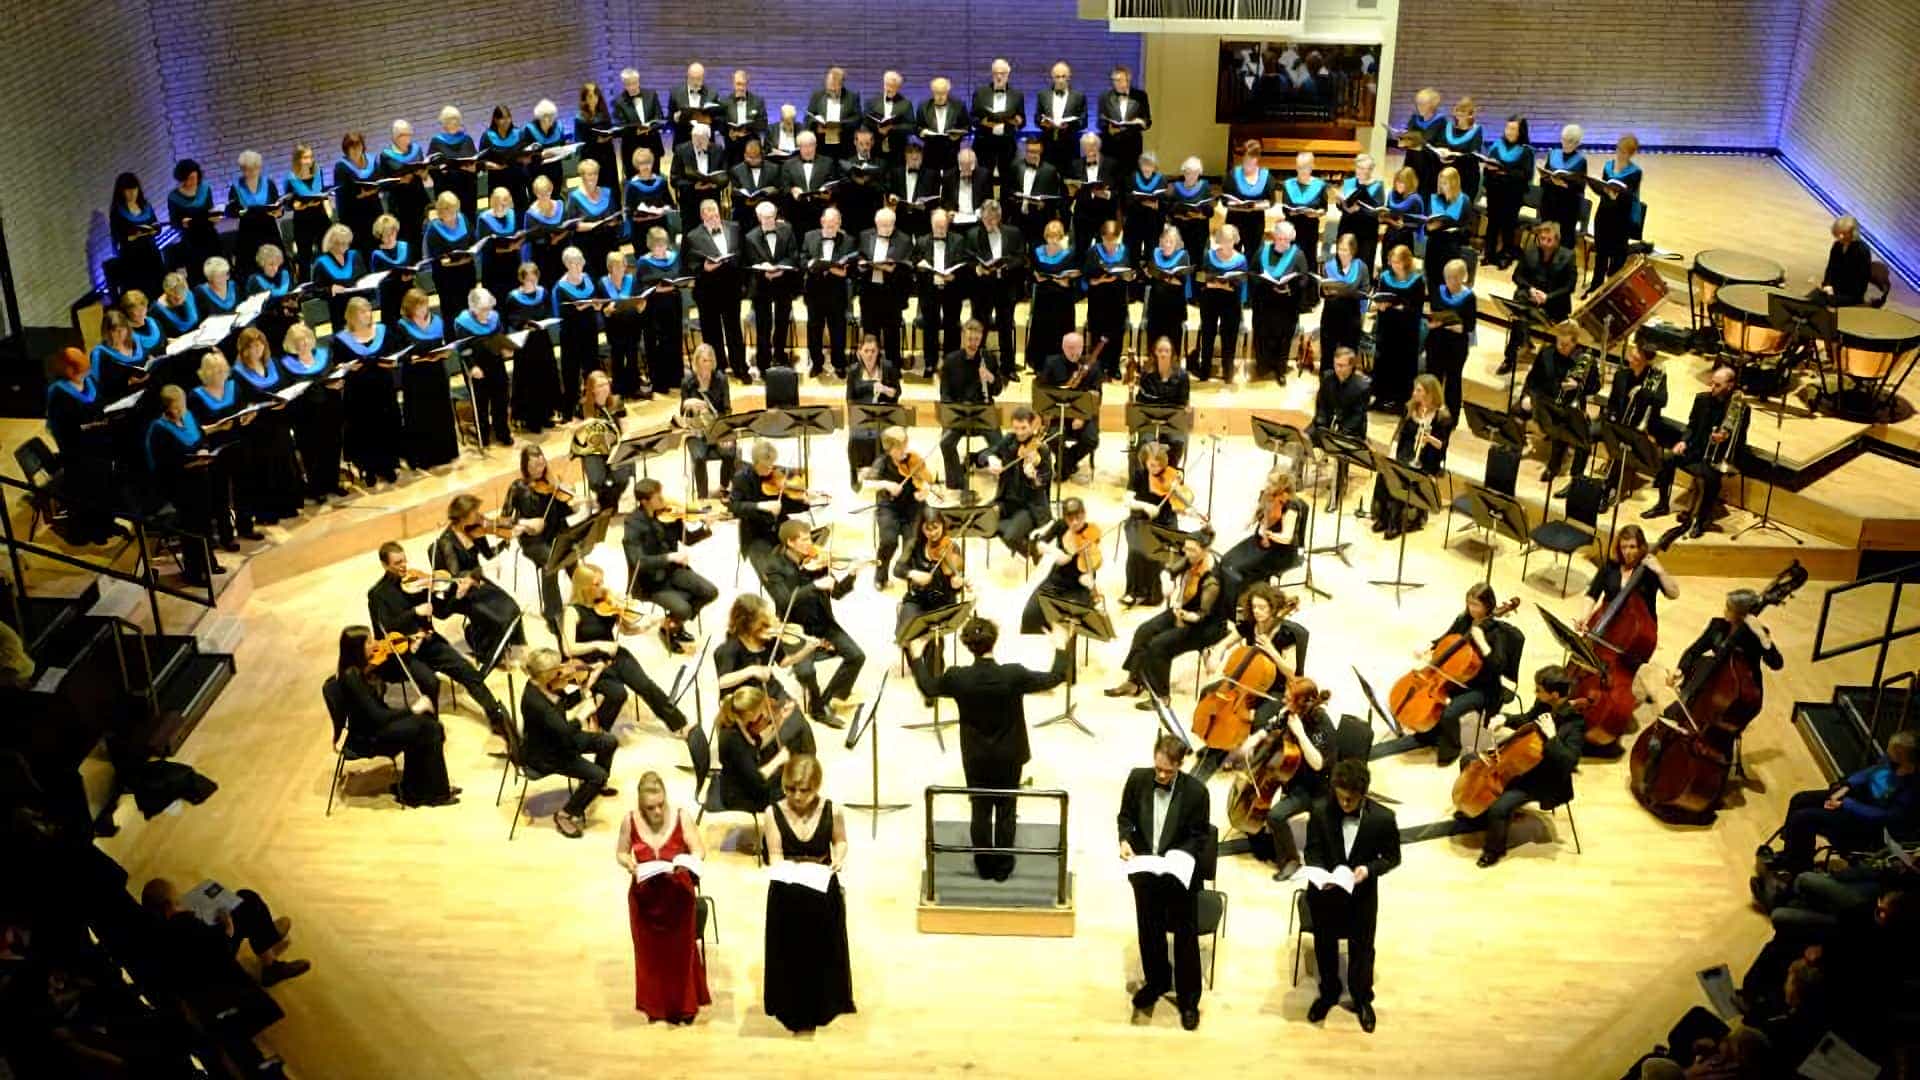 Salford Choral Society & Baroque in the North Orchestra - Handel's Messiah